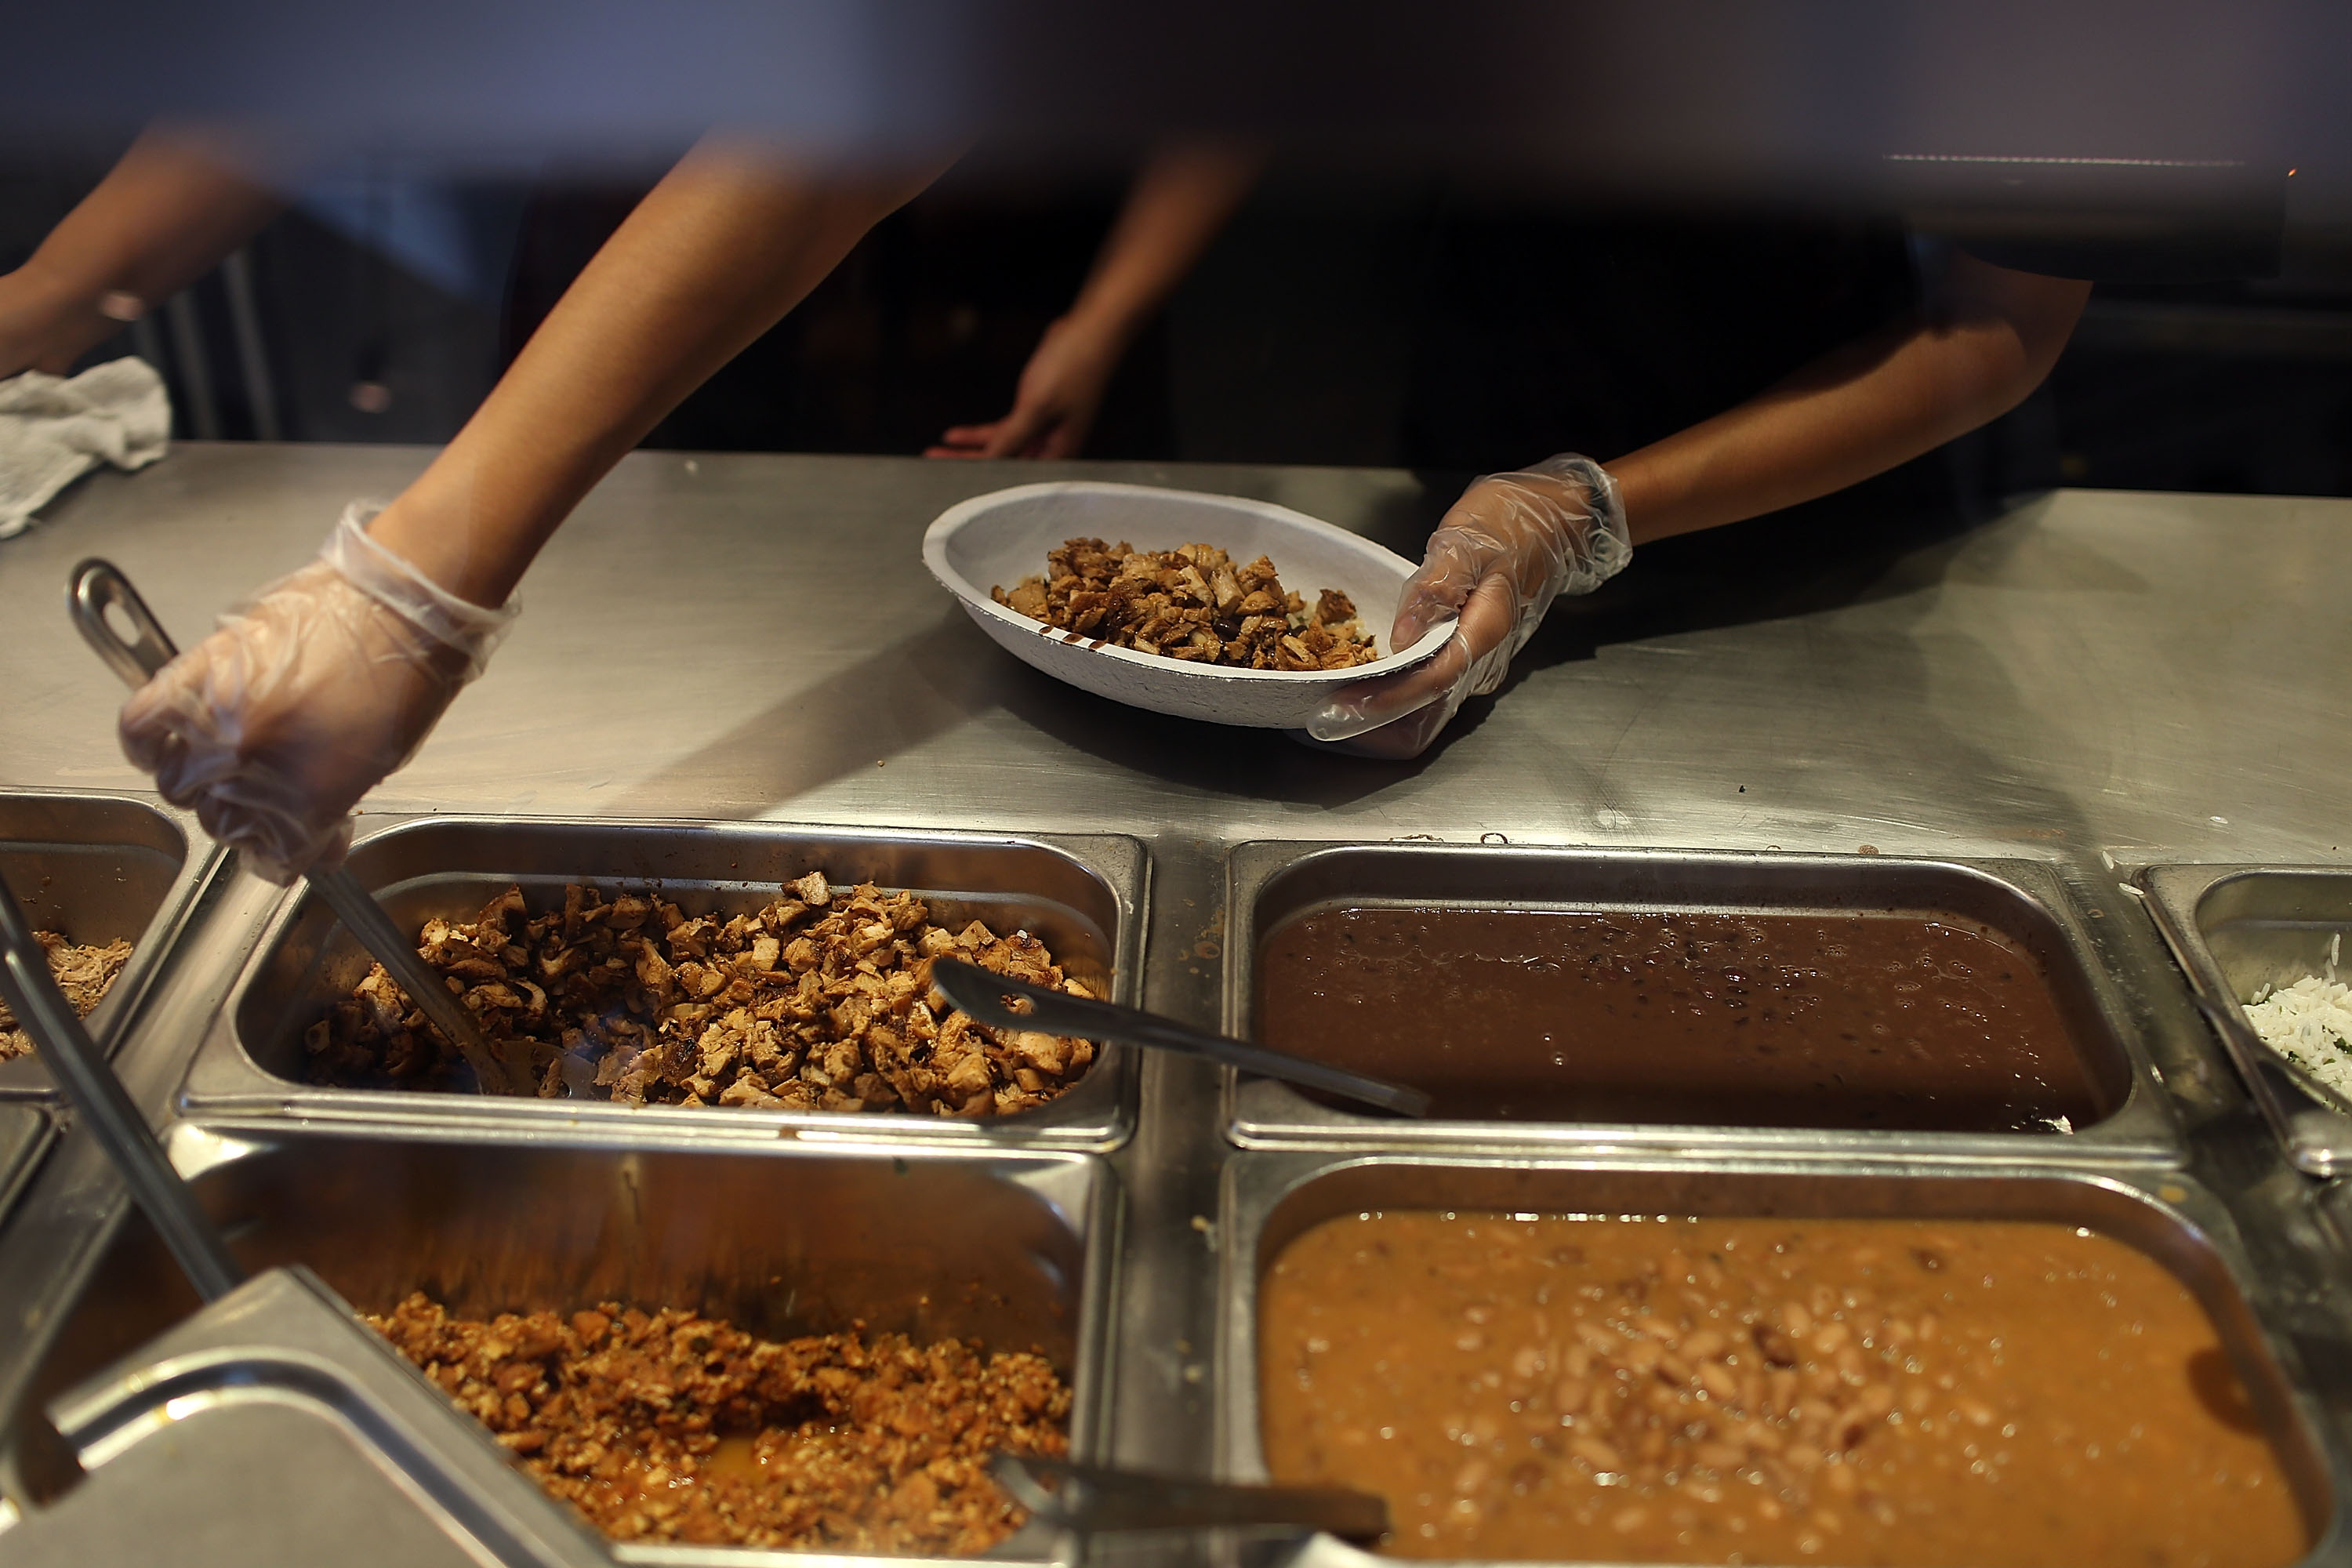 Chipotle restaurant workers fill orders for customers on the day that the company announced it will only use non-GMO ingredients in its food on April 27, 2015 in Miami, Florida. (Joe Raedle—Getty Images)